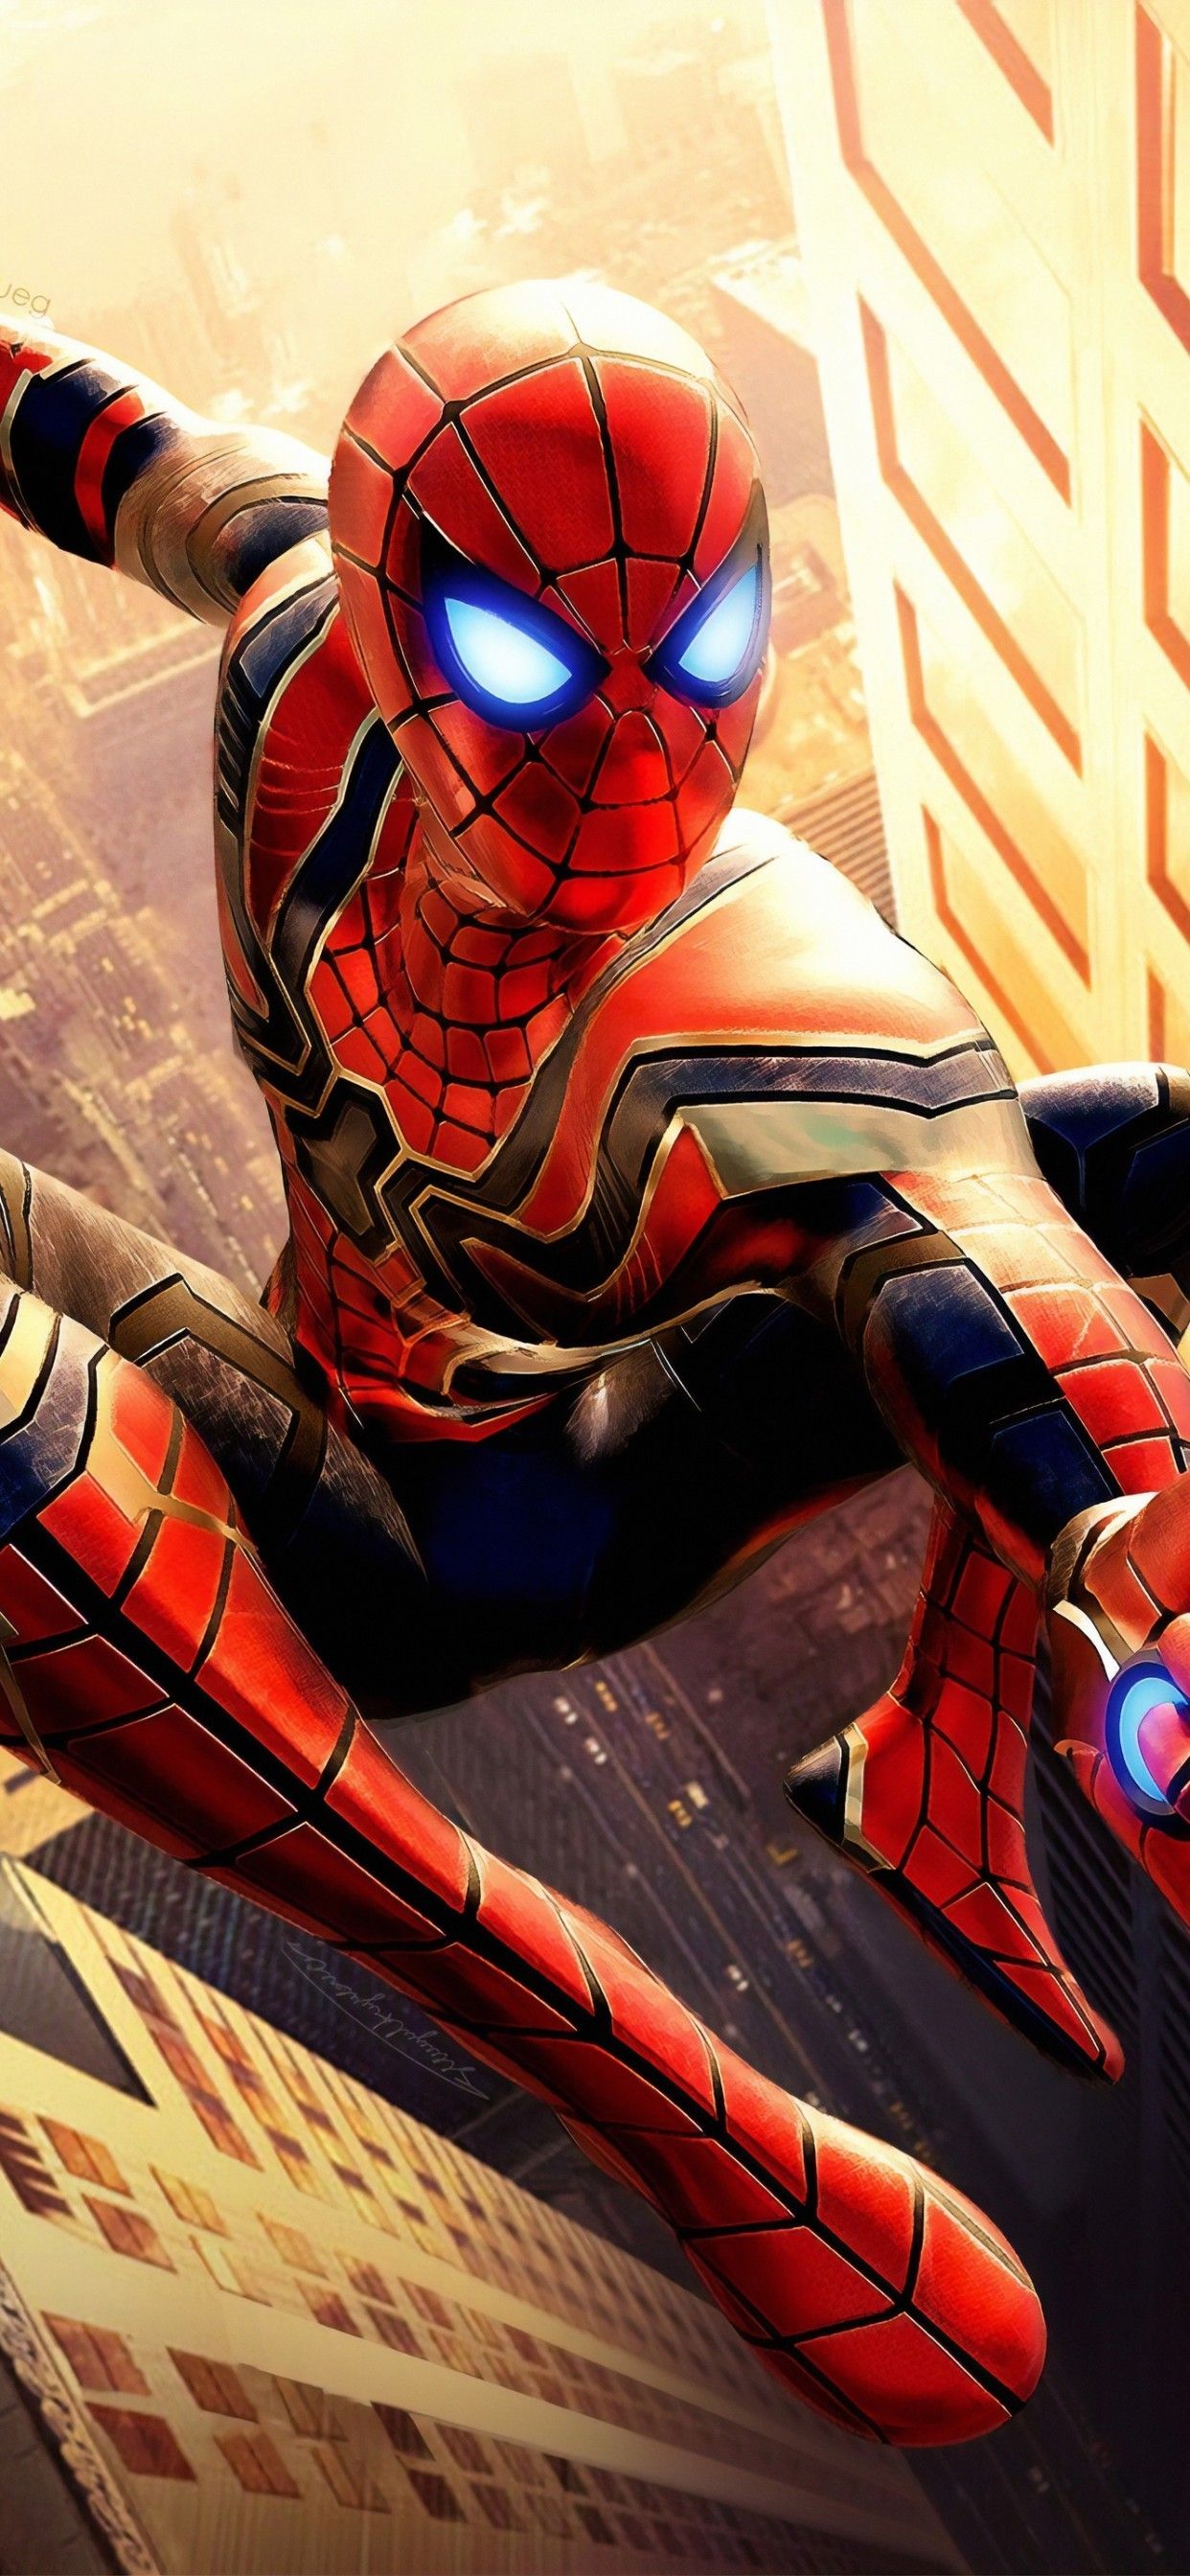 Download 1242x2688 Iron Spider, Jumping, Artwork, Building Facade